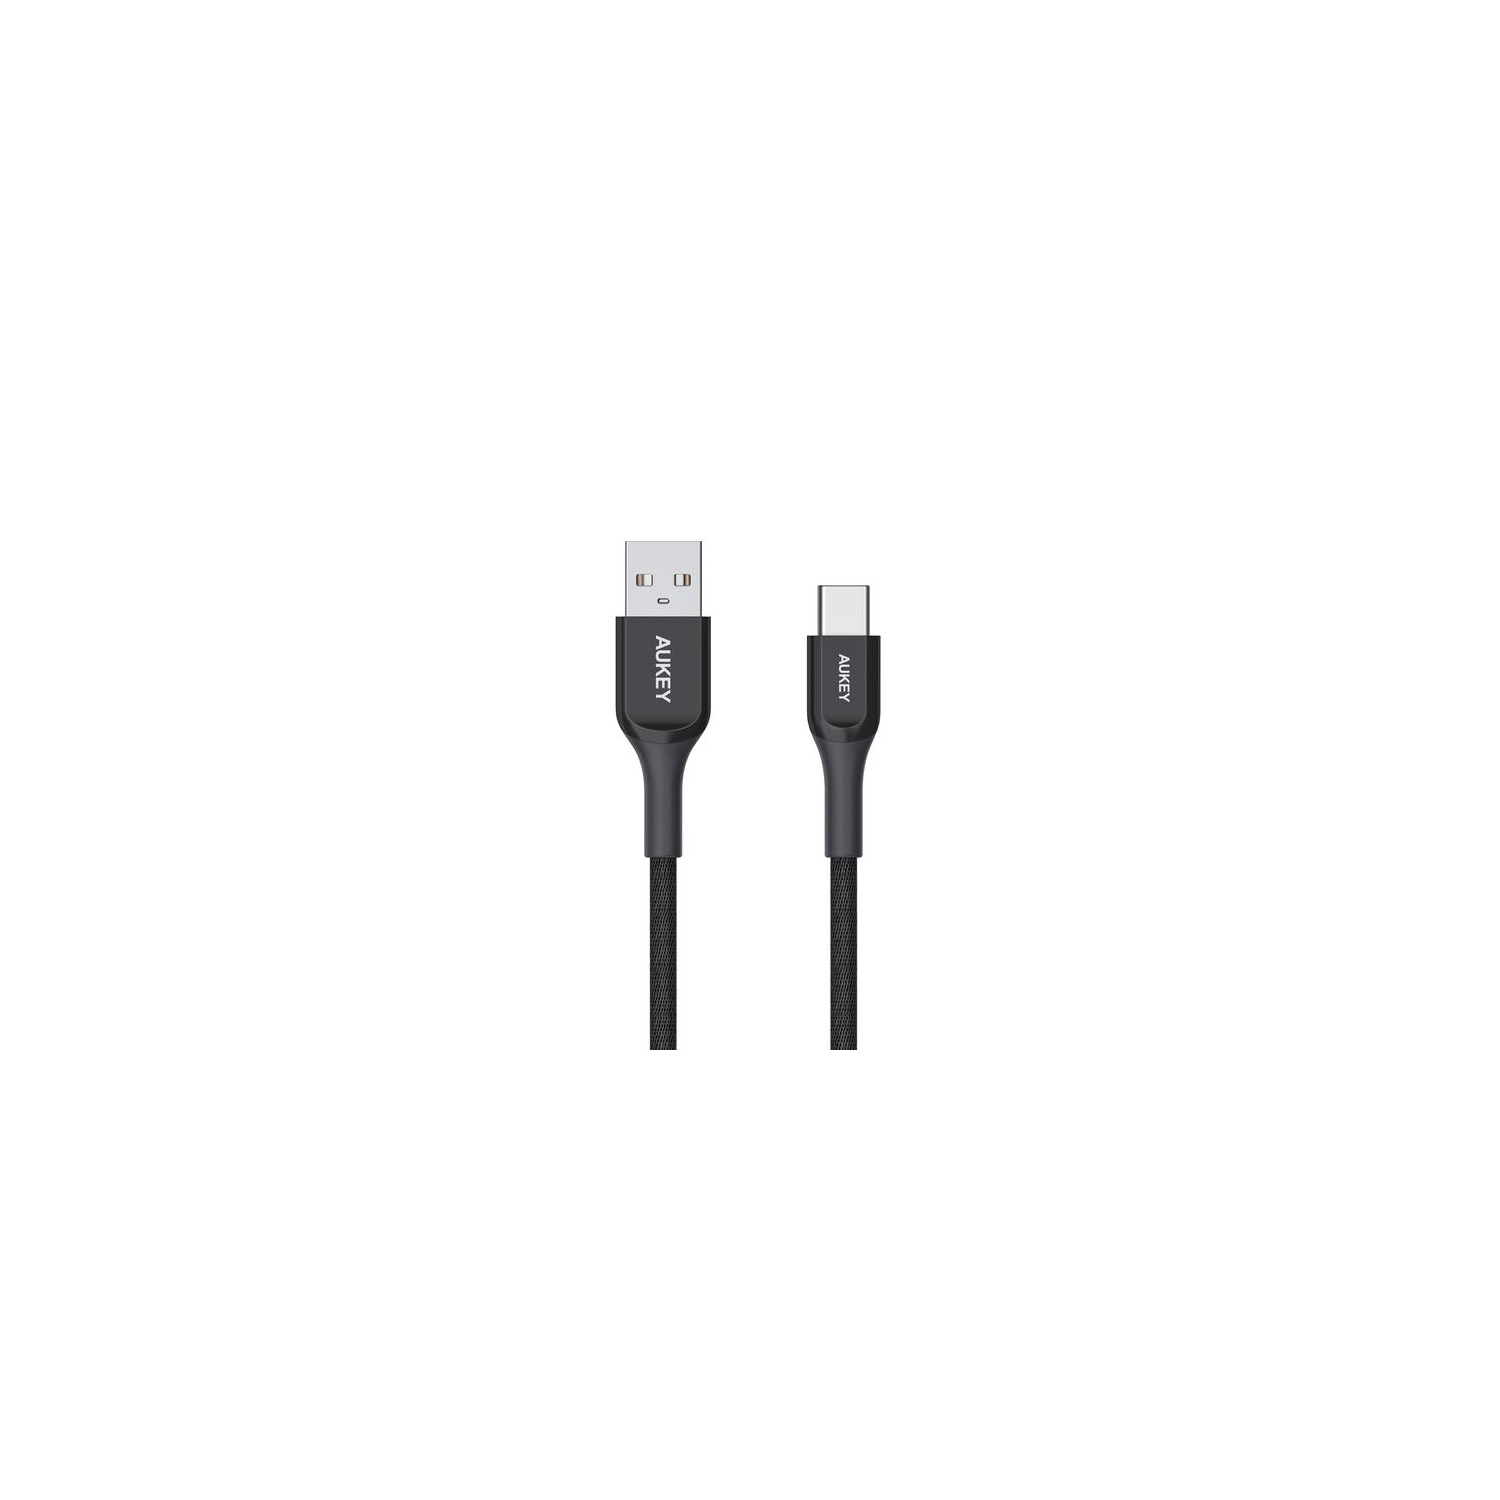 Aukey USB-A to USB-C Charging and Data Cable